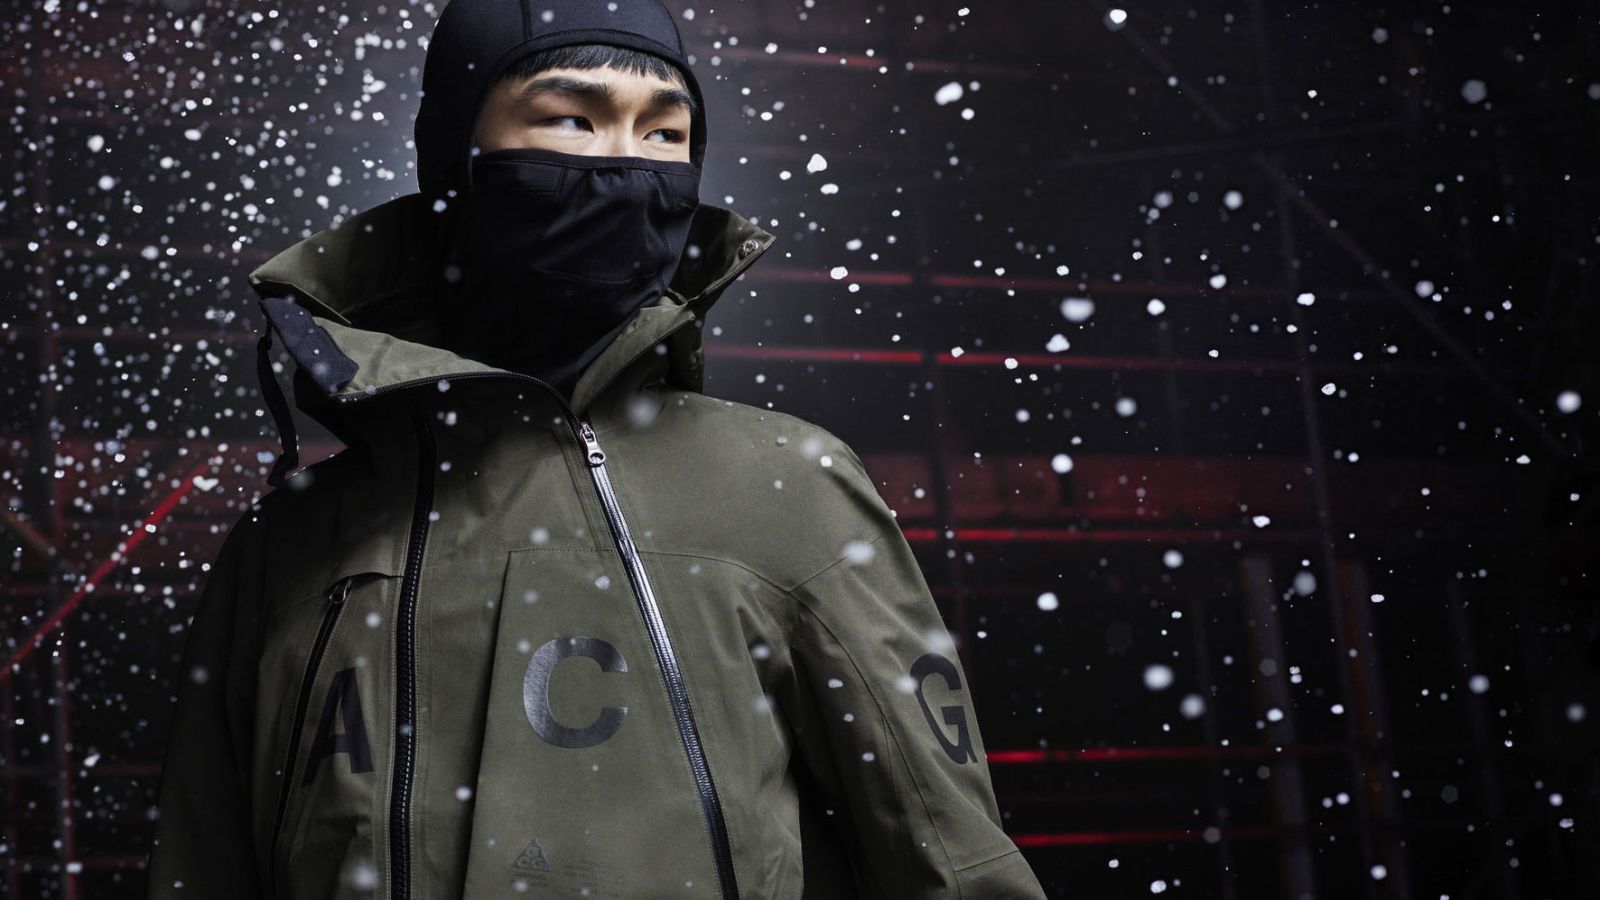 NikeLab's New ACG Collection Brings Urban Minimalism to All